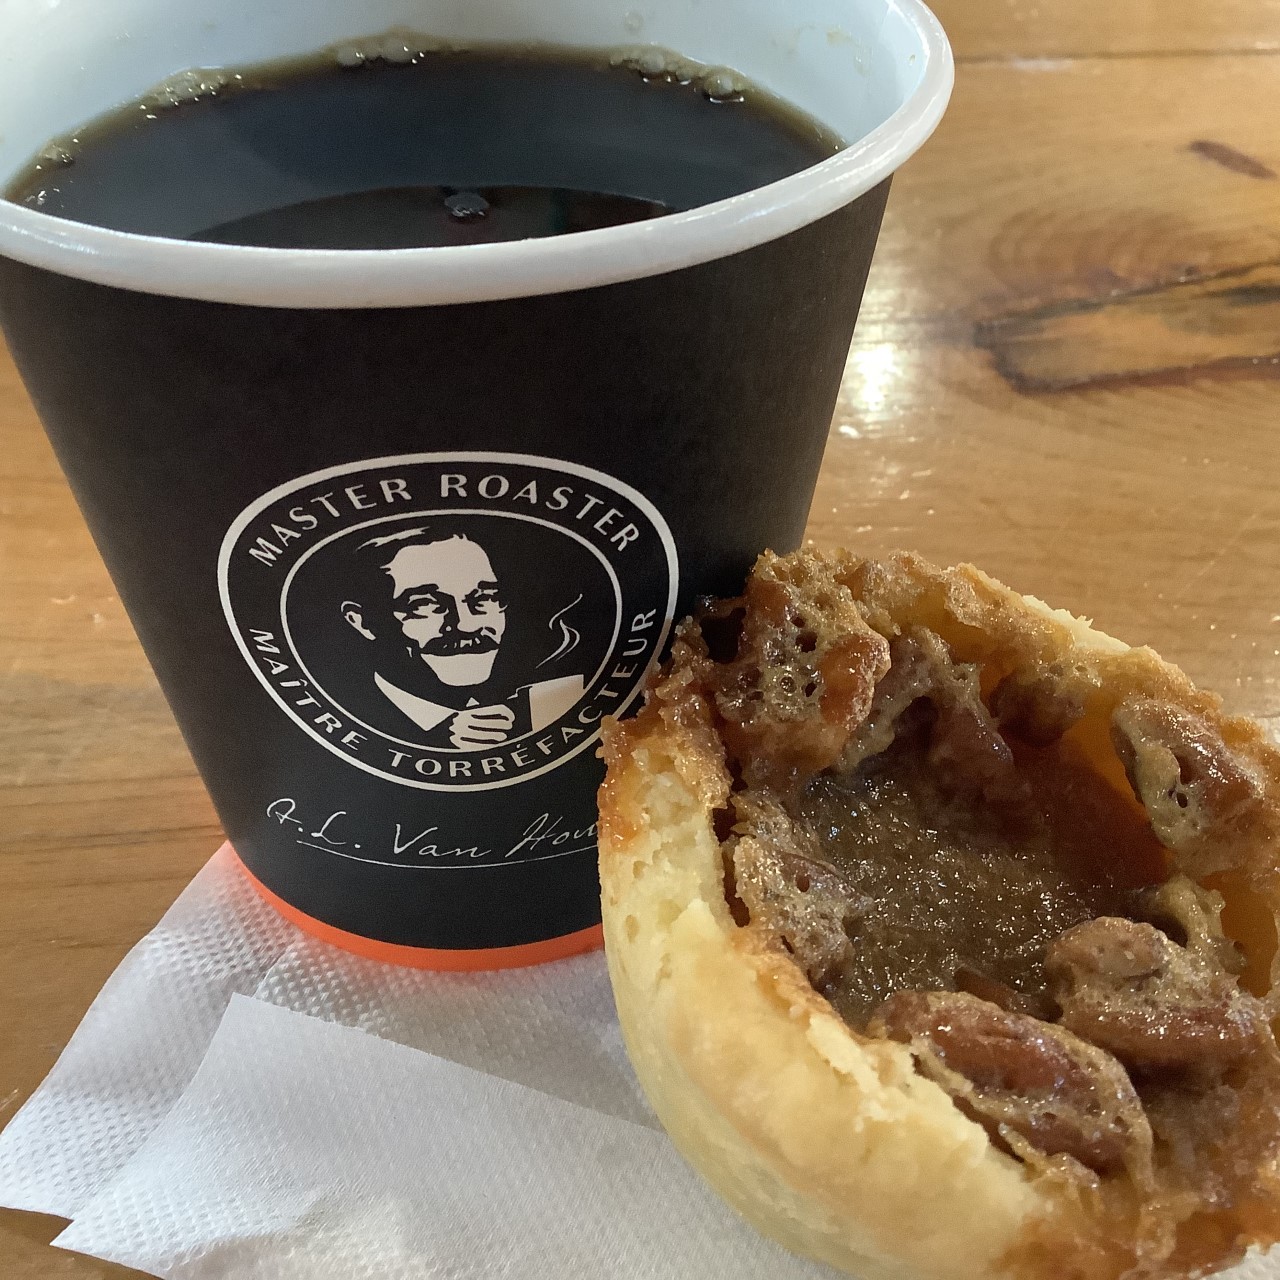 Van Houtte coffee cup filled with black coffee with a pecan butter tart leaning on it.